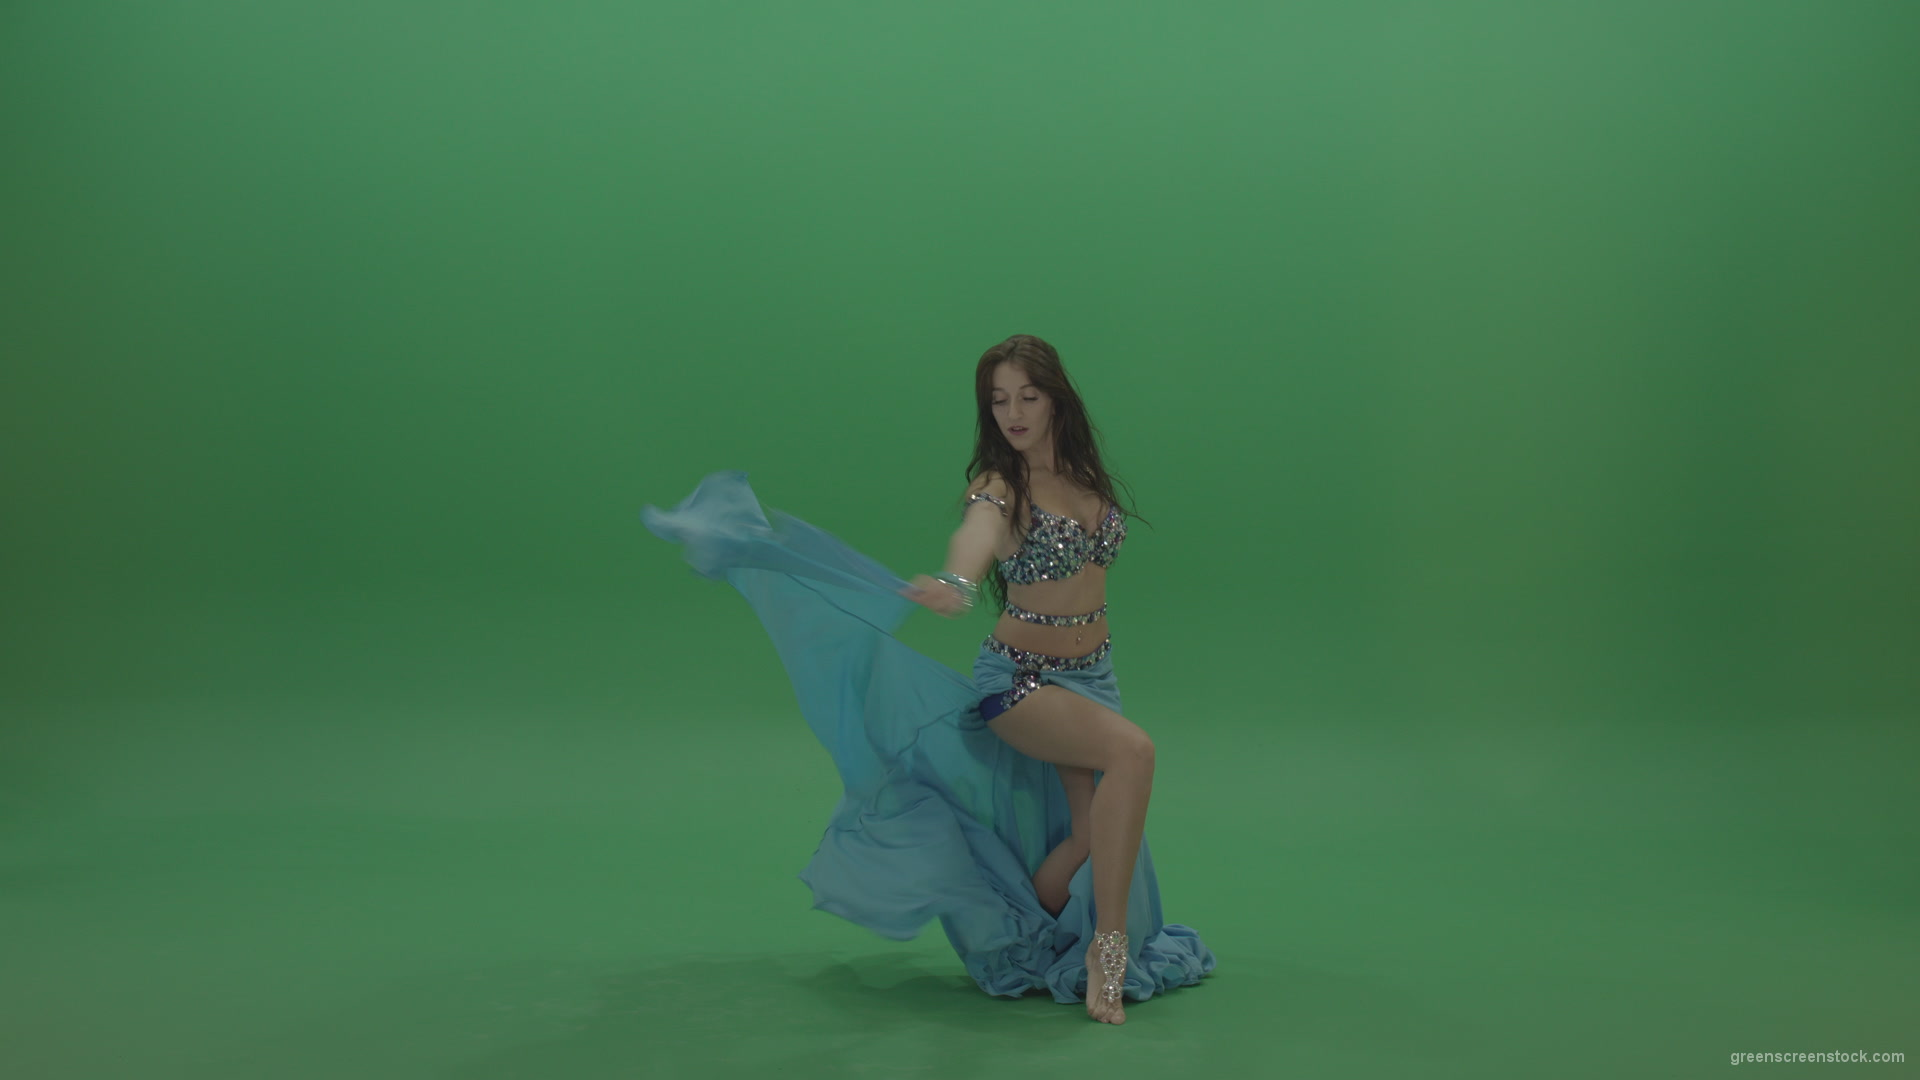 vj video background Fair-belly-dancer-in-blue-wear-display-amazing-dance-moves-over-chromakey-background_003